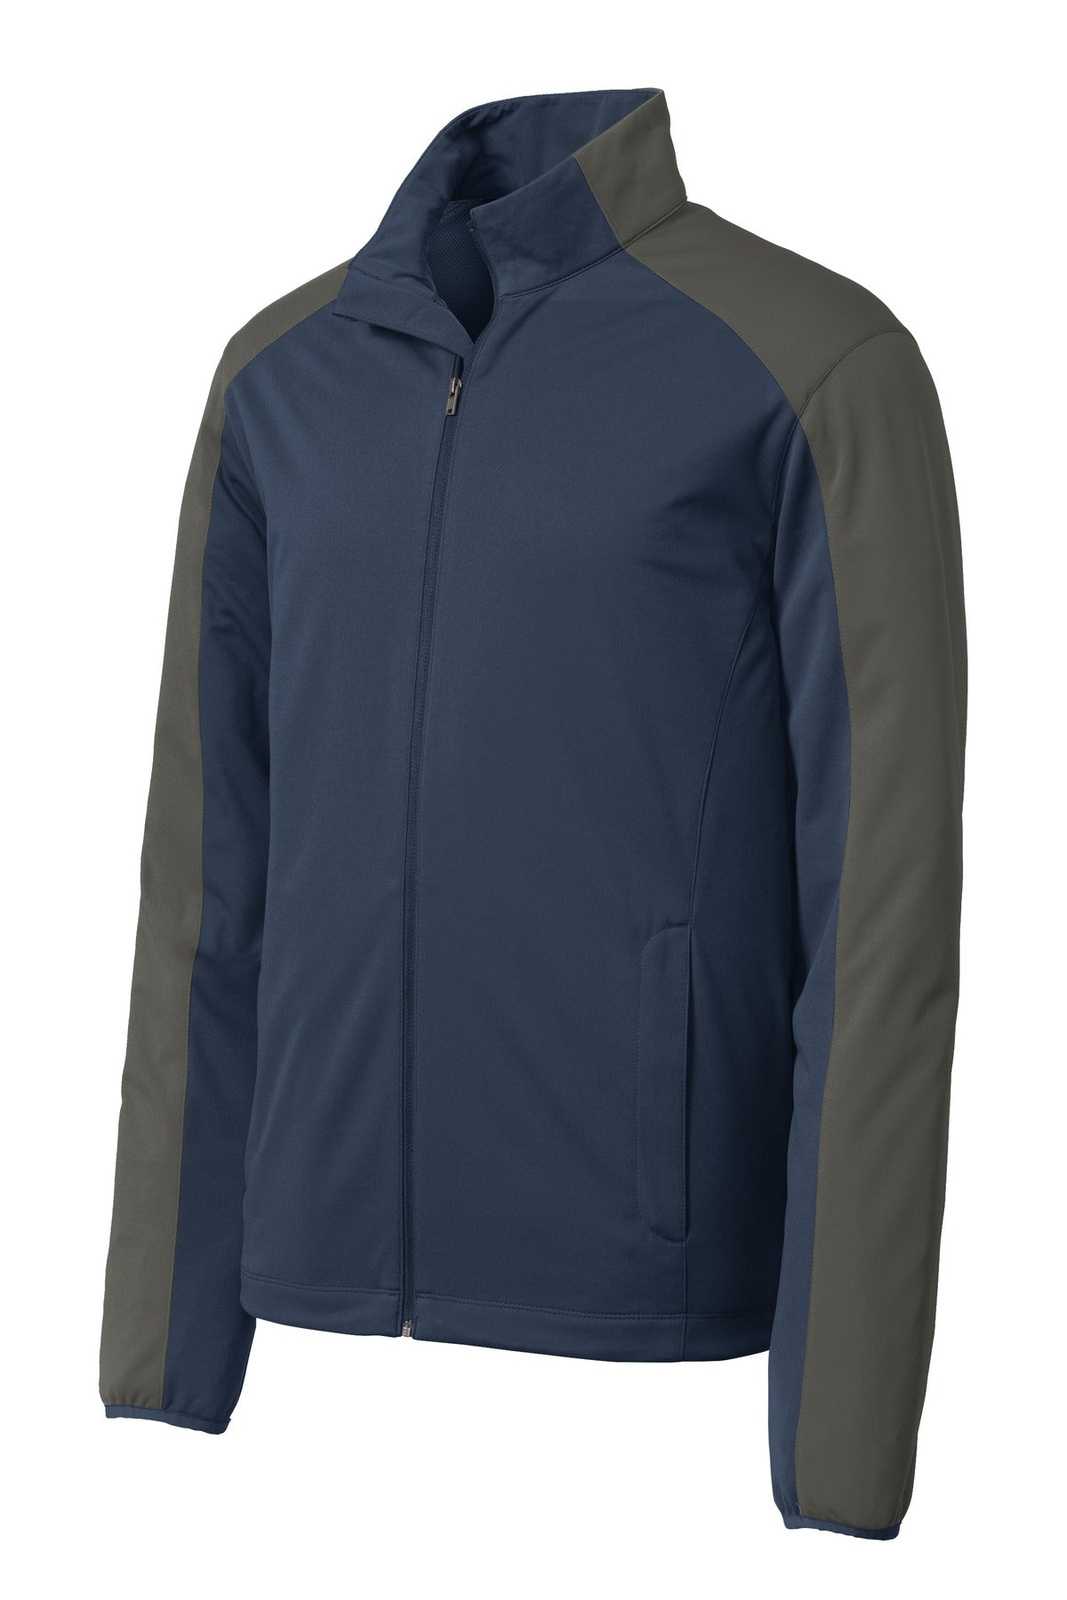 Port Authority J718 Active Colorblock Soft Shell Jacket - Dress Blue Navy Gray Steel - HIT a Double - 5